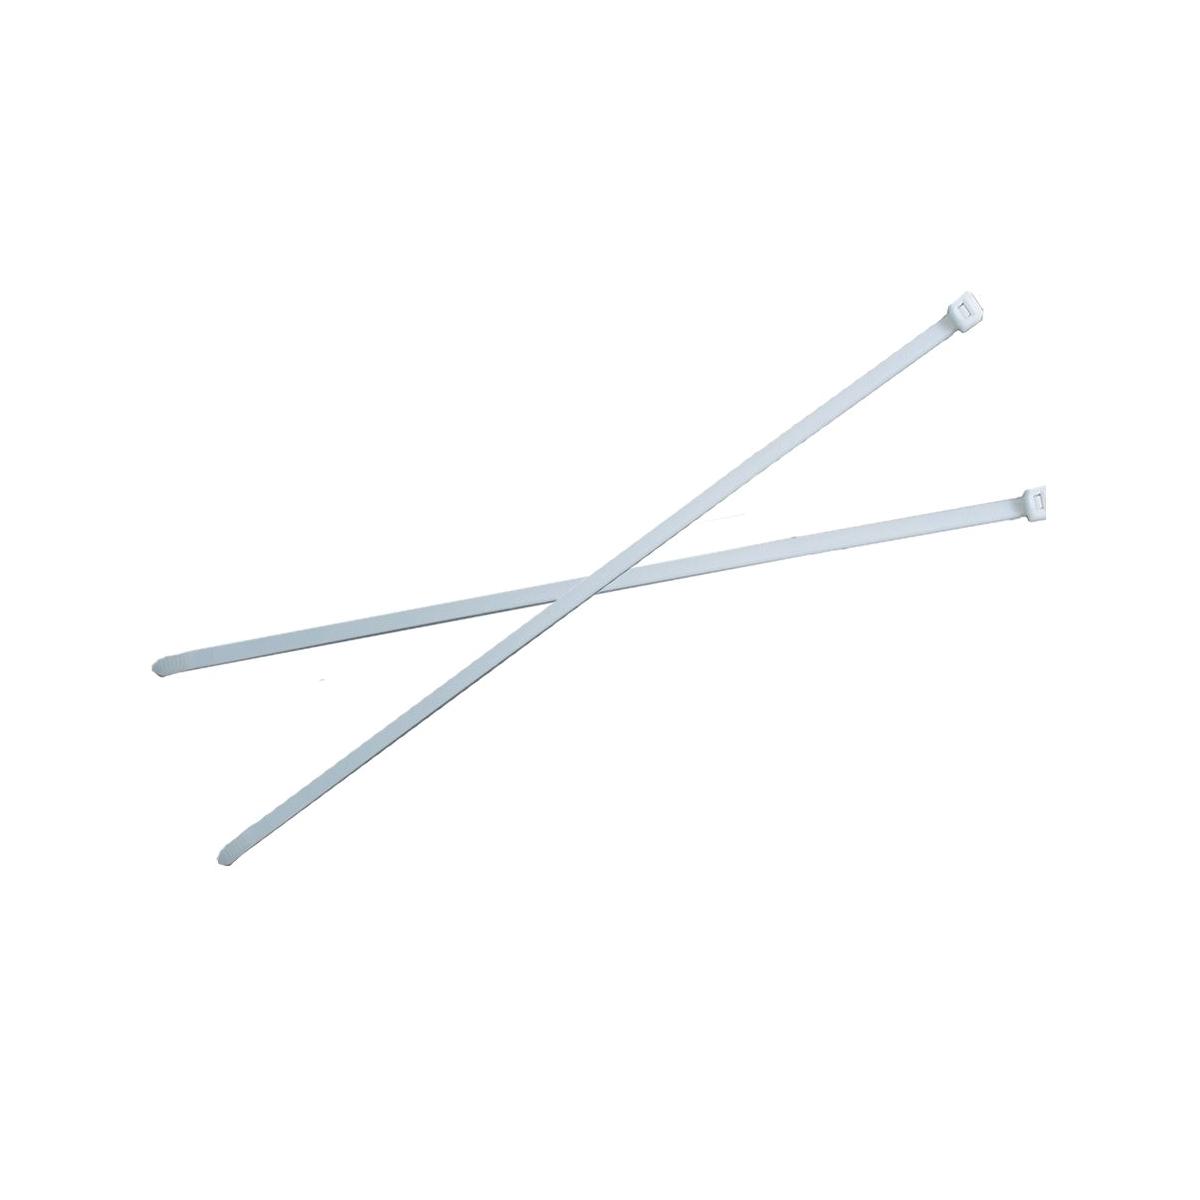 Hubbell CT50175M Natural Nylon 6/6 Cable Tie, 1.75" Max. Bundle Dia, 50 Lbs, 8" Long, 0.18" Wide.  ; Standard Cable Tie ; Features: Cable Ties for General Use Available in Black or Natural, One piece injection molded, Installation Tool: TWT1, MK7 Tool